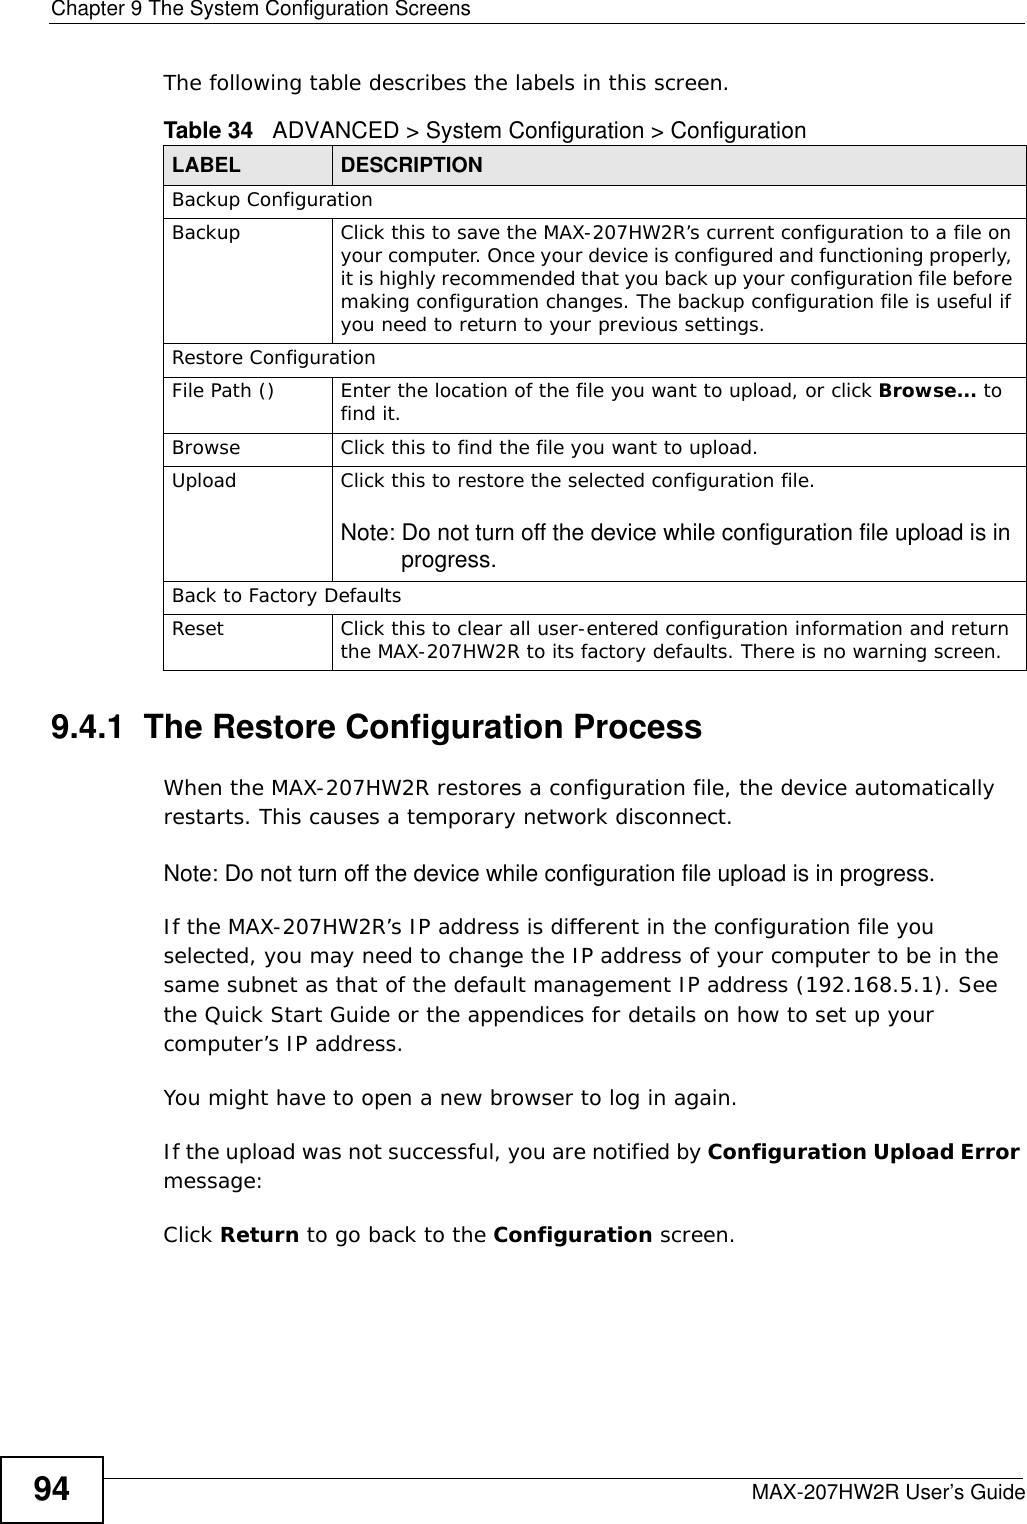 Chapter 9 The System Configuration ScreensMAX-207HW2R User’s Guide94The following table describes the labels in this screen.  9.4.1  The Restore Configuration ProcessWhen the MAX-207HW2R restores a configuration file, the device automatically restarts. This causes a temporary network disconnect. Note: Do not turn off the device while configuration file upload is in progress.If the MAX-207HW2R’s IP address is different in the configuration file you selected, you may need to change the IP address of your computer to be in the same subnet as that of the default management IP address (192.168.5.1). See the Quick Start Guide or the appendices for details on how to set up your computer’s IP address.You might have to open a new browser to log in again.If the upload was not successful, you are notified by Configuration Upload Error message:Click Return to go back to the Configuration screen.Table 34   ADVANCED &gt; System Configuration &gt; ConfigurationLABEL DESCRIPTIONBackup ConfigurationBackup Click this to save the MAX-207HW2R’s current configuration to a file on your computer. Once your device is configured and functioning properly, it is highly recommended that you back up your configuration file before making configuration changes. The backup configuration file is useful if you need to return to your previous settings.Restore ConfigurationFile Path () Enter the location of the file you want to upload, or click Browse... to find it.Browse Click this to find the file you want to upload.Upload Click this to restore the selected configuration file.Note: Do not turn off the device while configuration file upload is in progress.Back to Factory DefaultsReset Click this to clear all user-entered configuration information and return the MAX-207HW2R to its factory defaults. There is no warning screen.